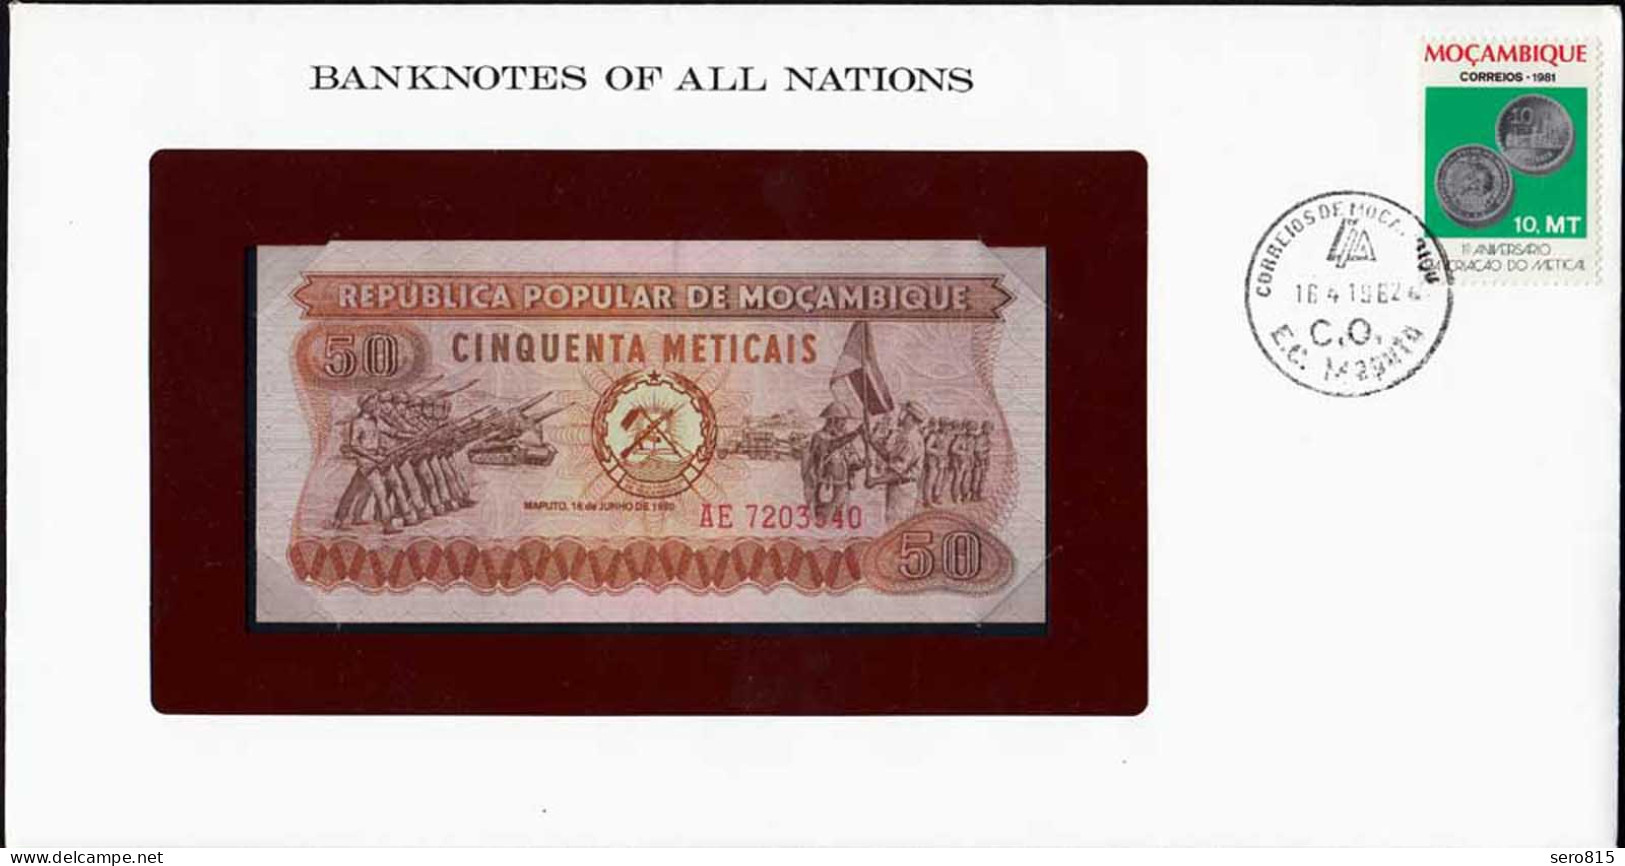 Banknotes Of All Nations - Mosambik 50 Meticais 1980 Pick 125 UNC (15625 - Other - Africa